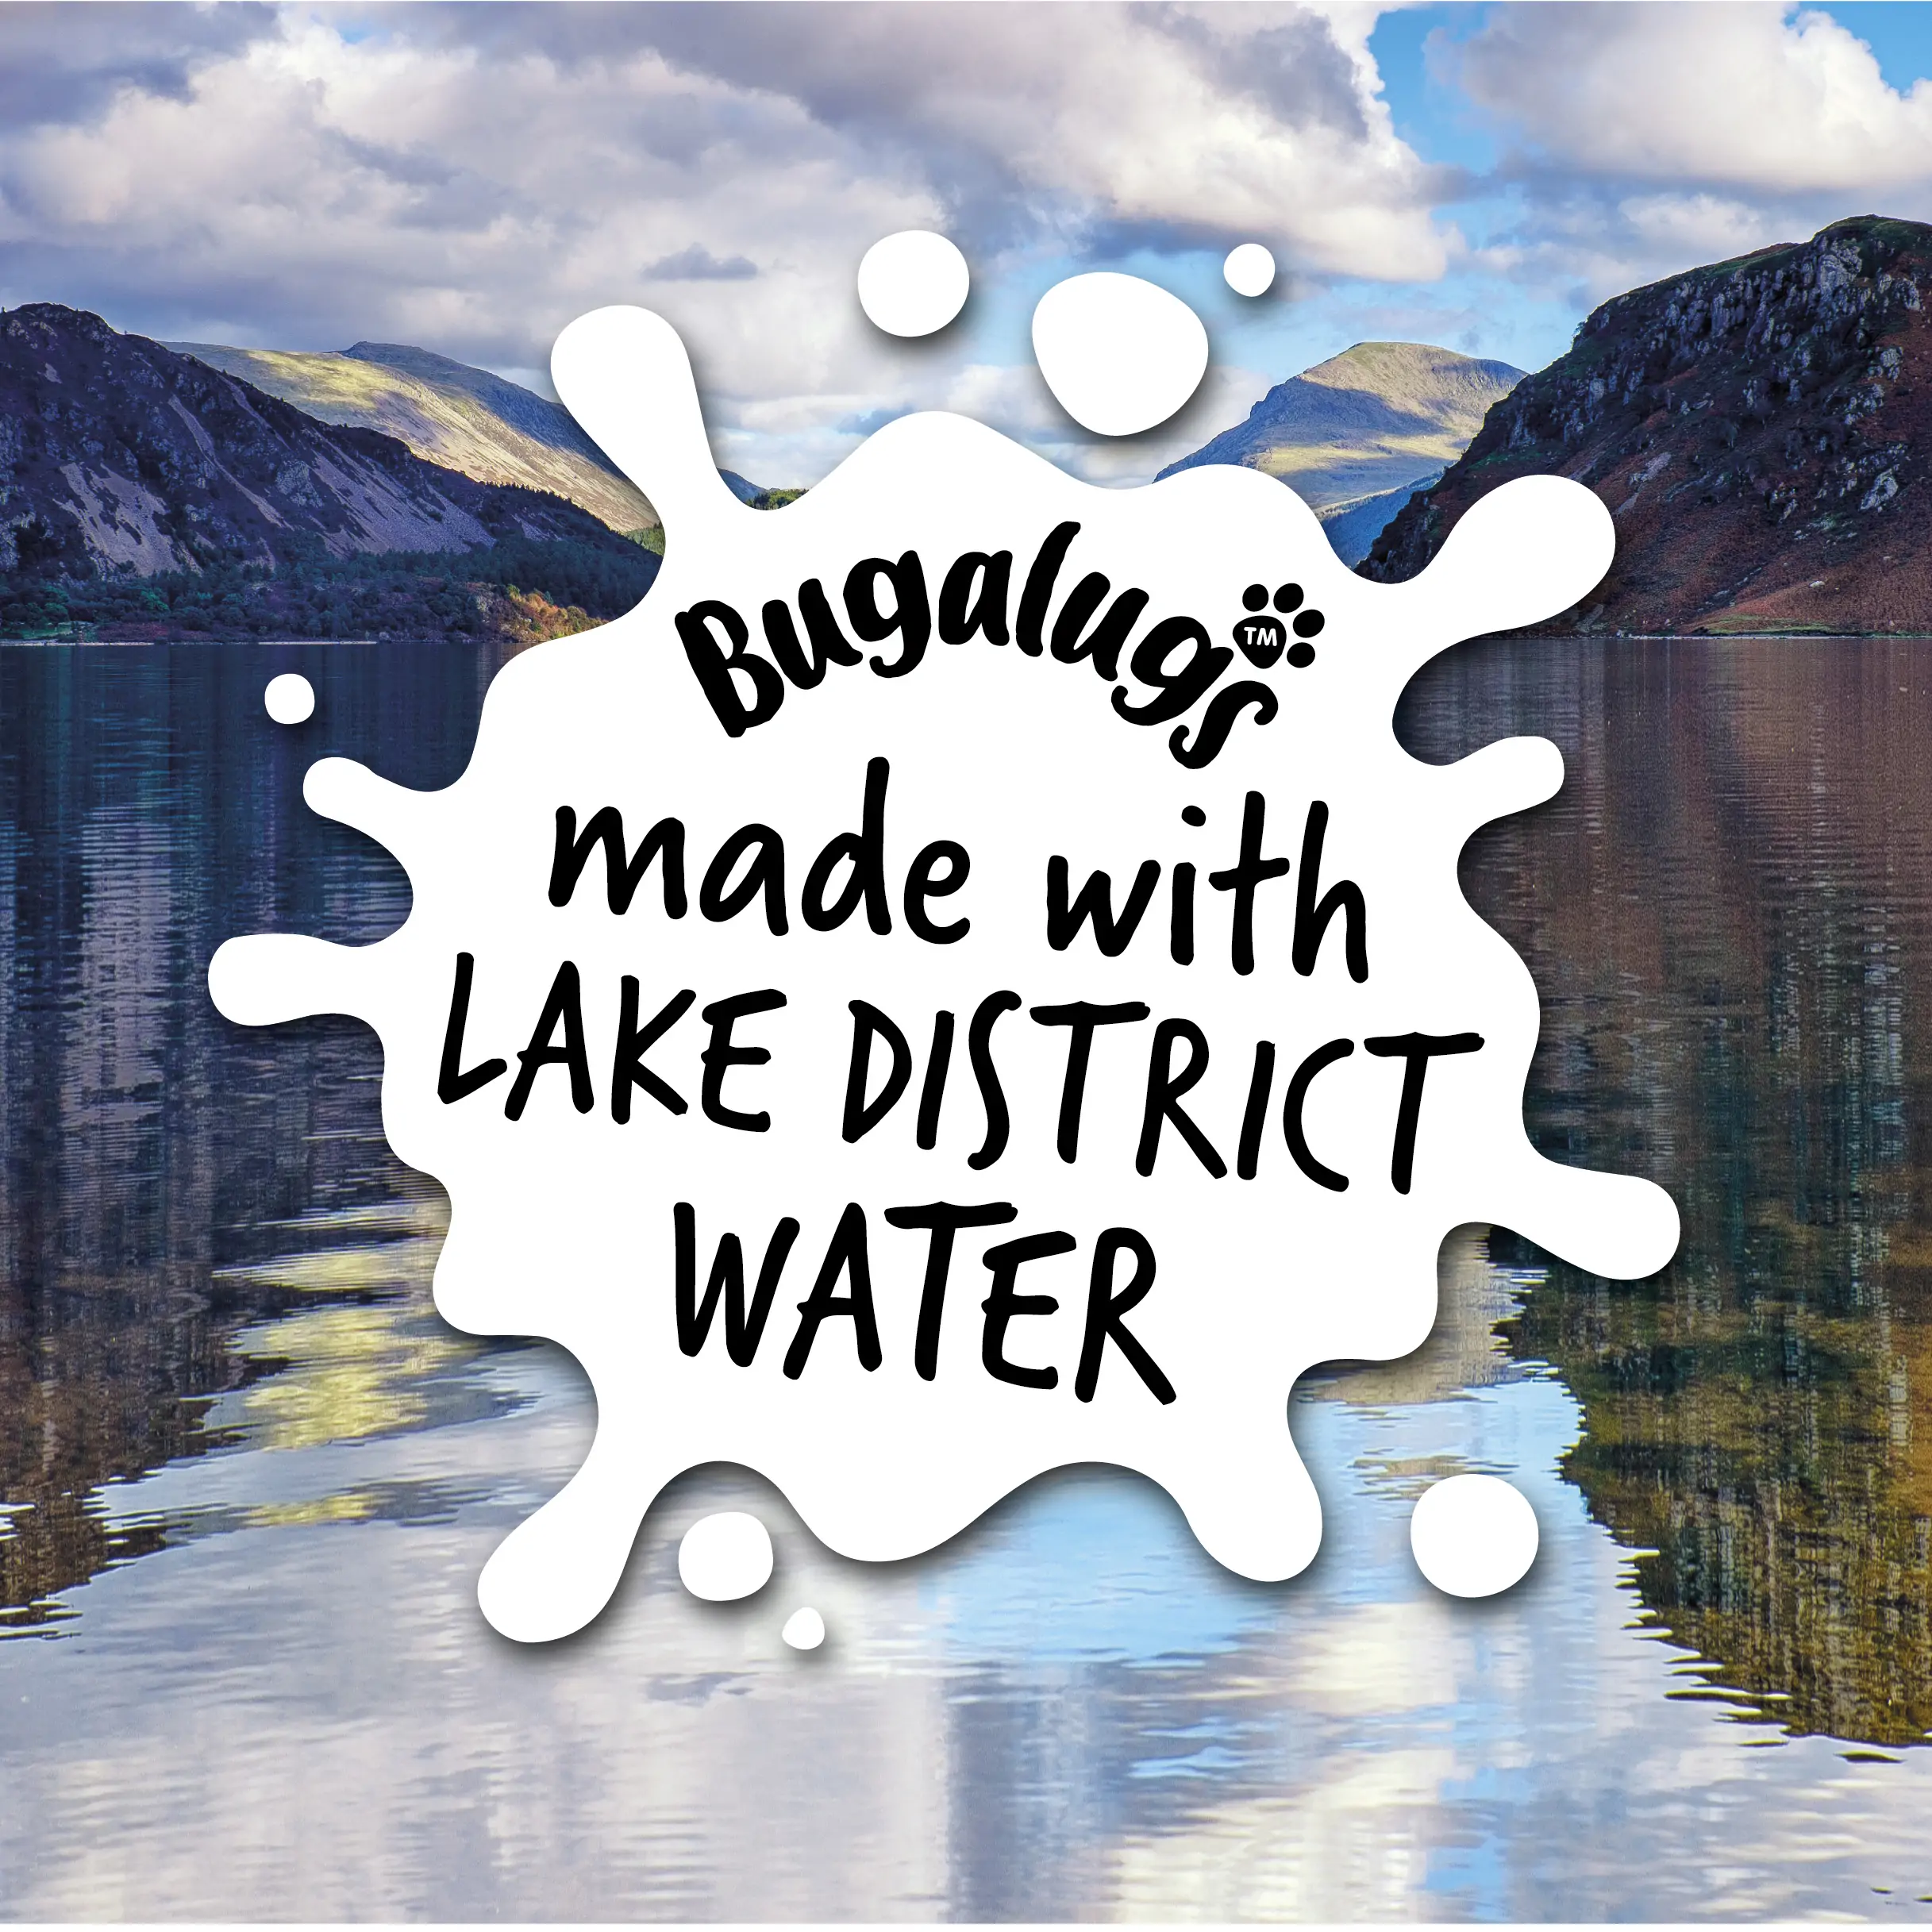 Bugalugs - Made with Lake District Water